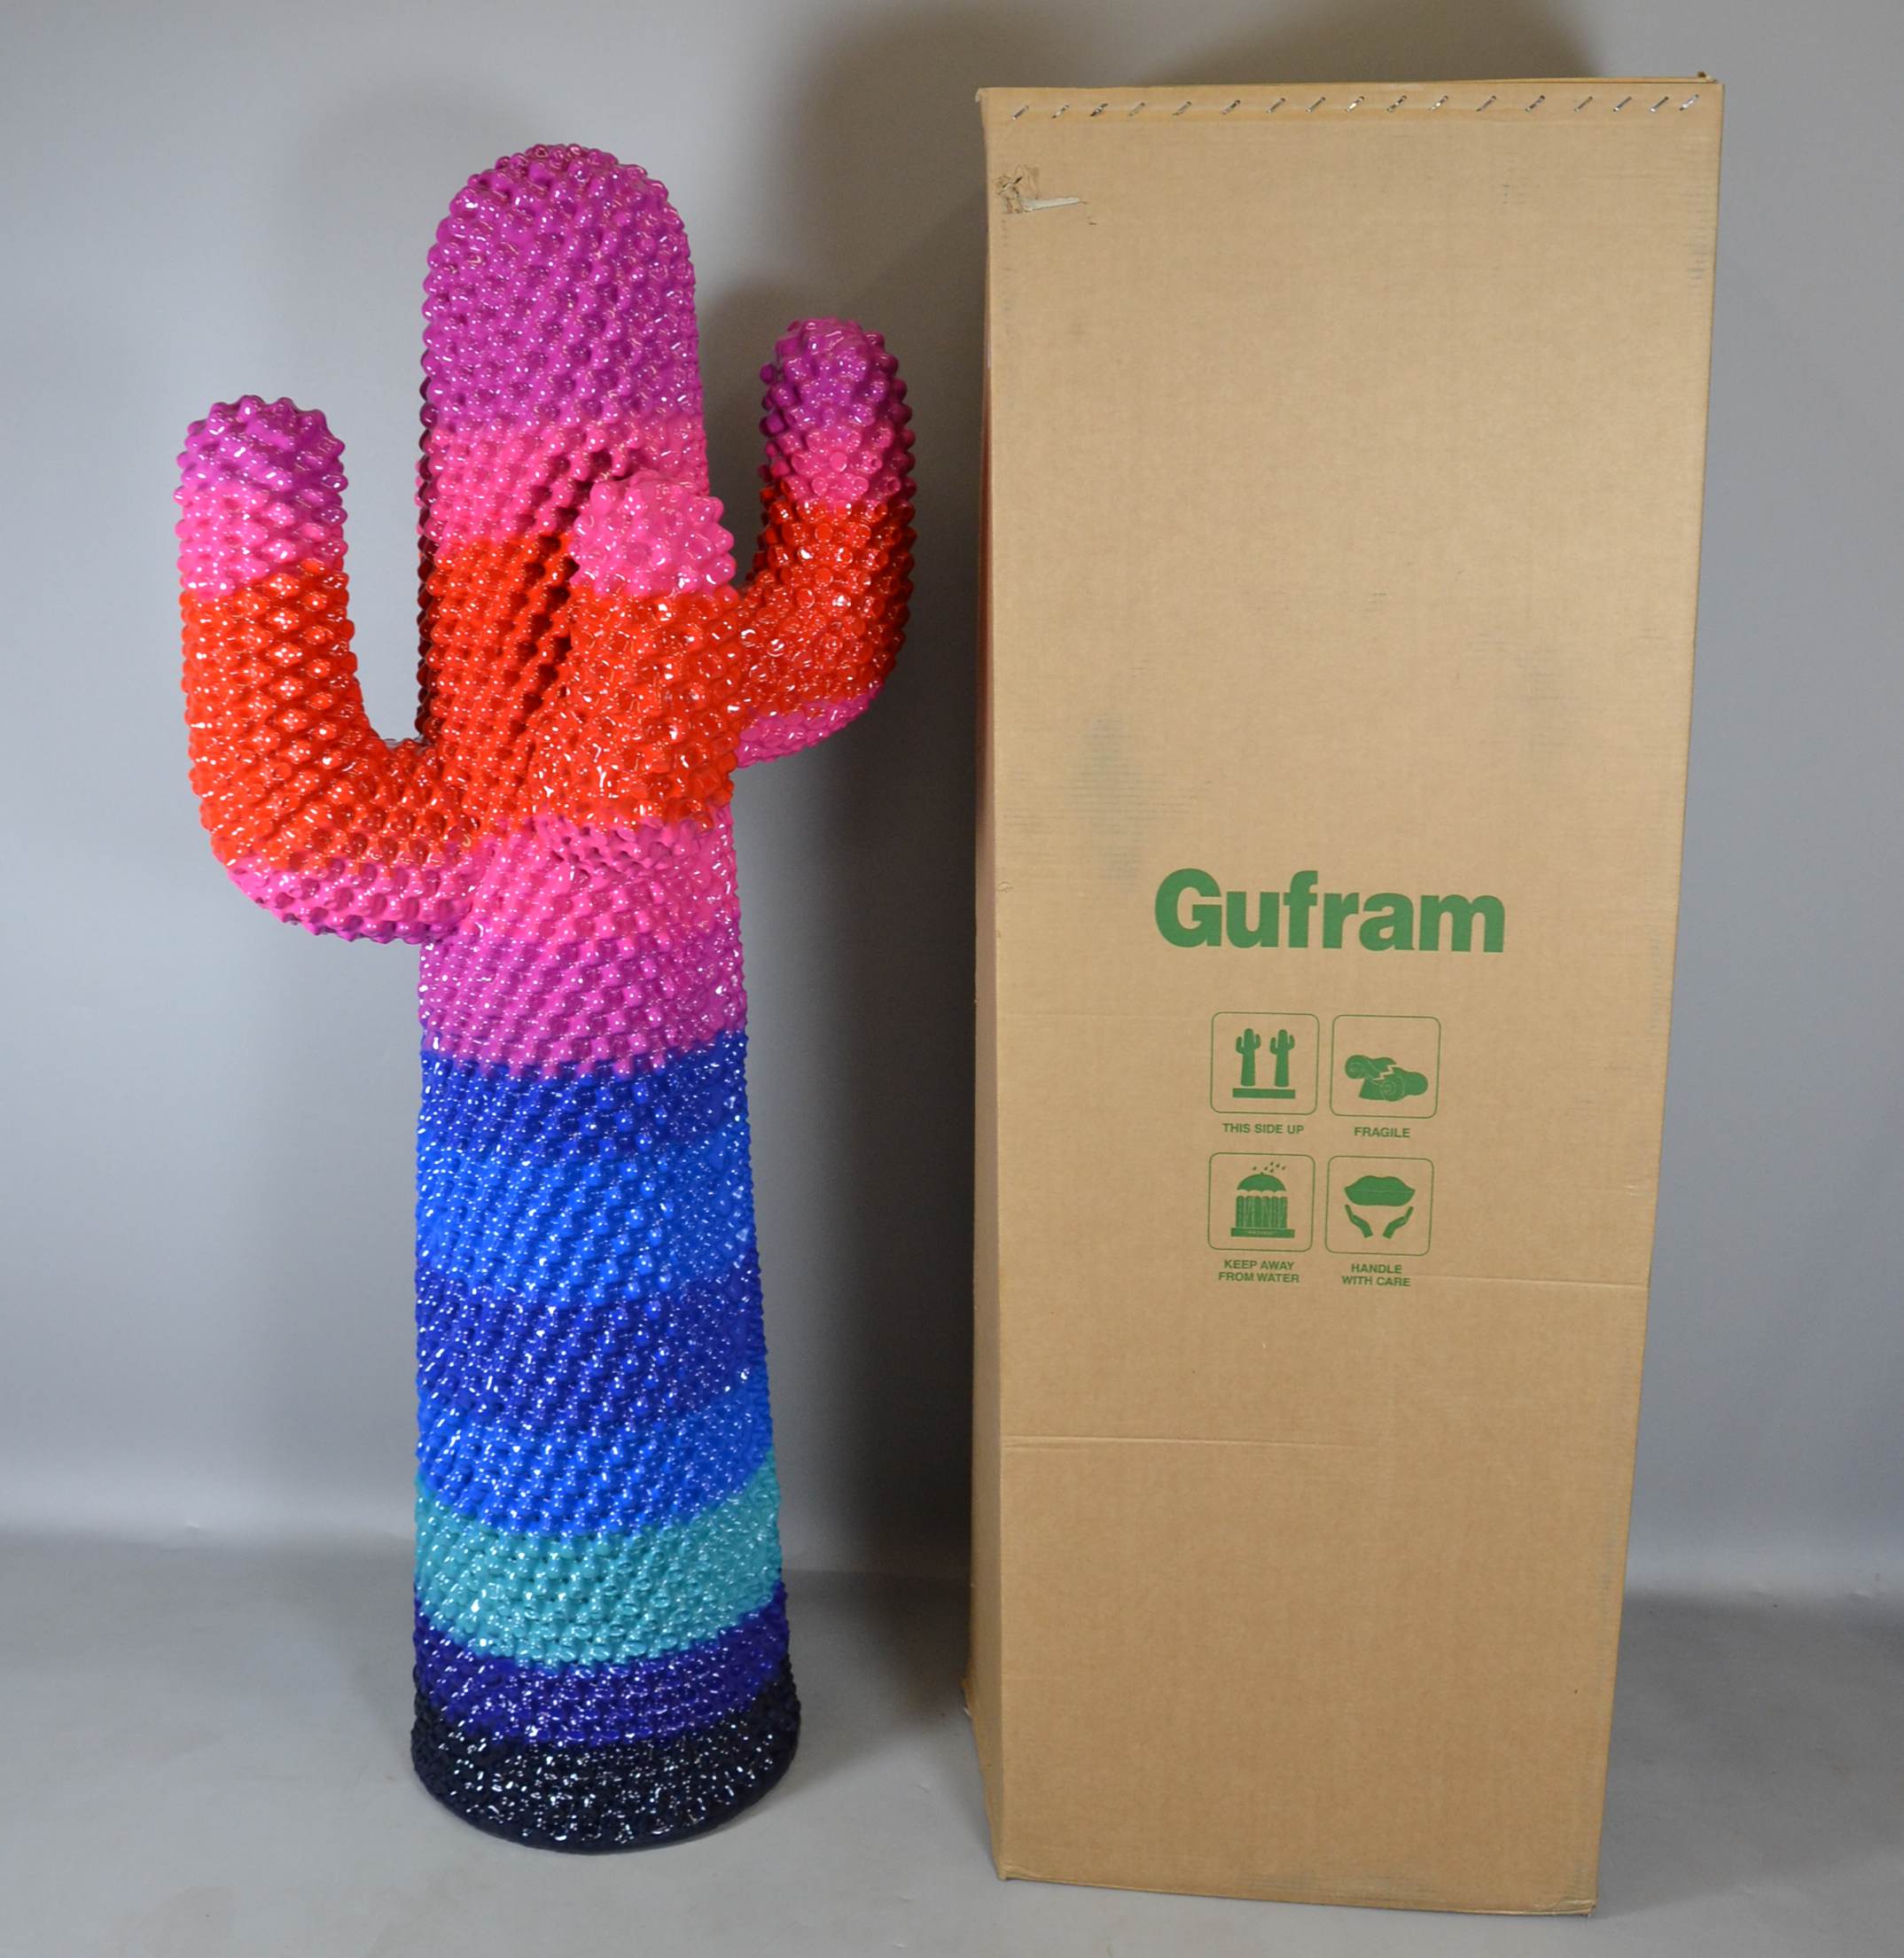 Psychedelic Cactus Gufram Drocco Mello and Paul Smith Limited Edition For  Sale at 1stDibs